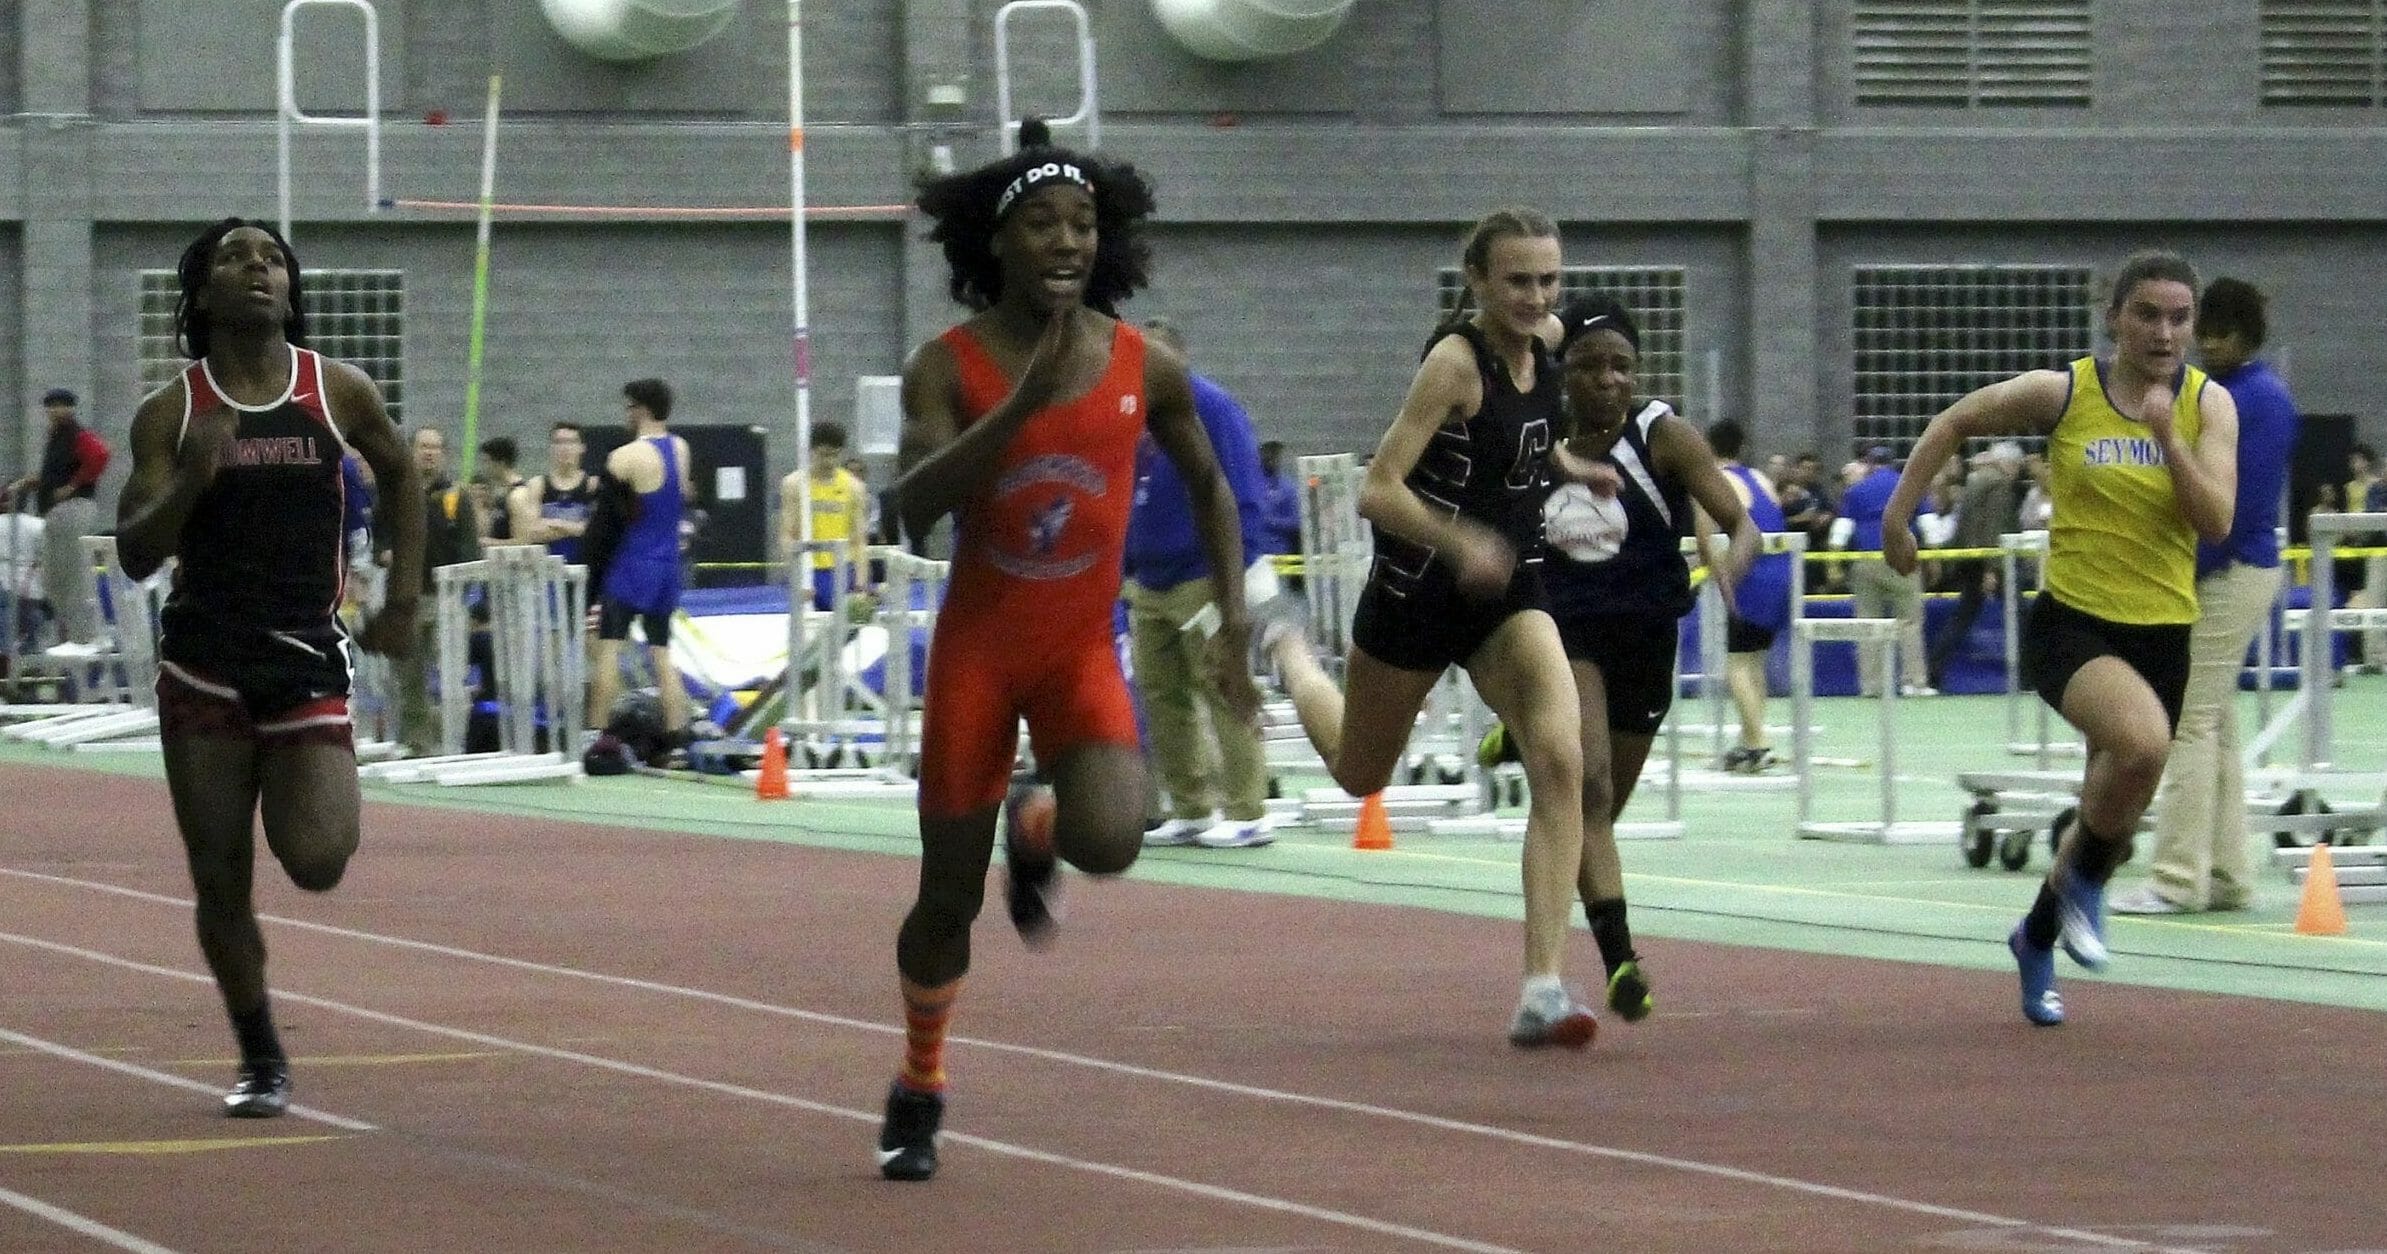 Bloomfield High School transgender athlete Terry Miller, second from left, wins the final of the 55-meter dash over transgender athlete Andraya Yearwood, far left, and female runners in the Connecticut girls Class S indoor track meet at Hillhouse High School in New Haven on Feb. 7, 2019.